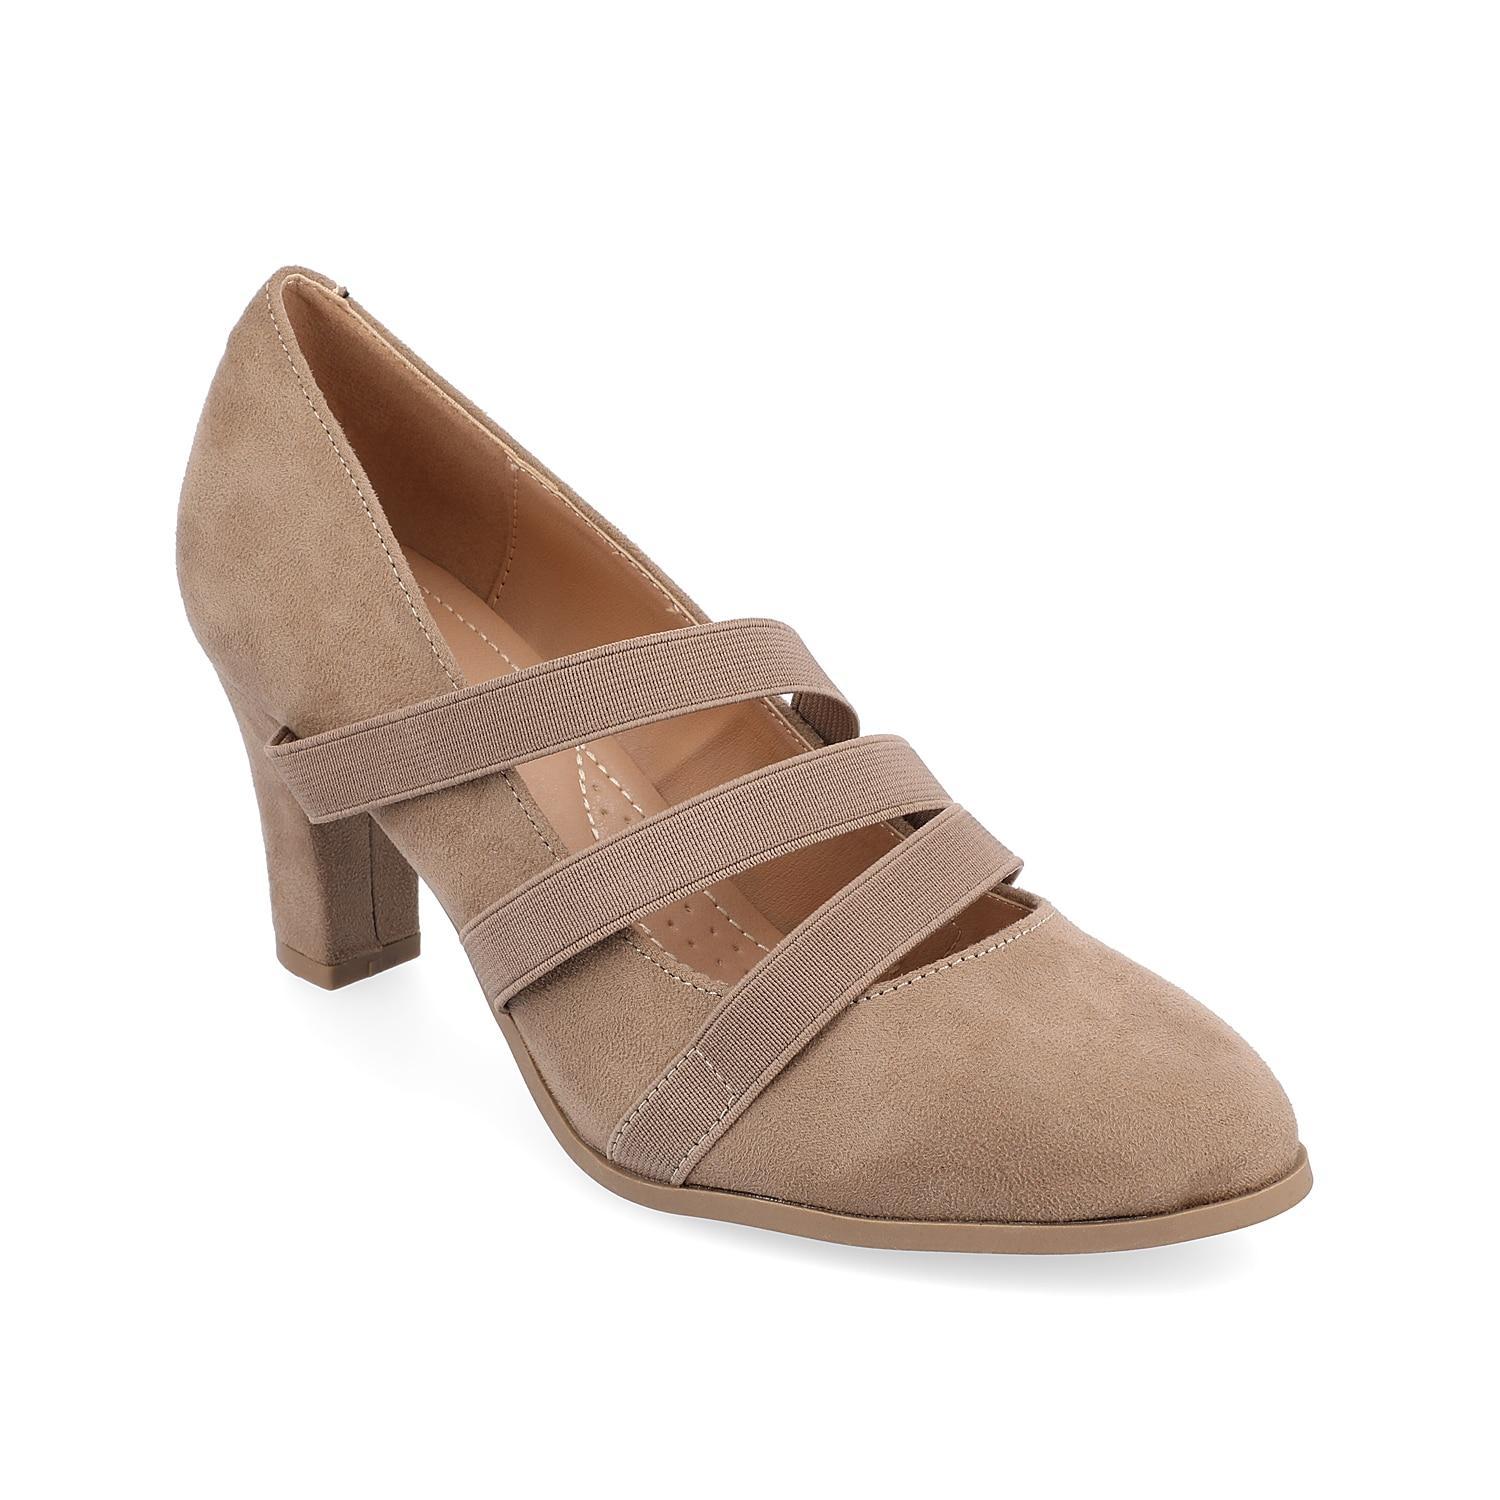 Journee Collection Womens Loren Heels Womens Shoes Product Image